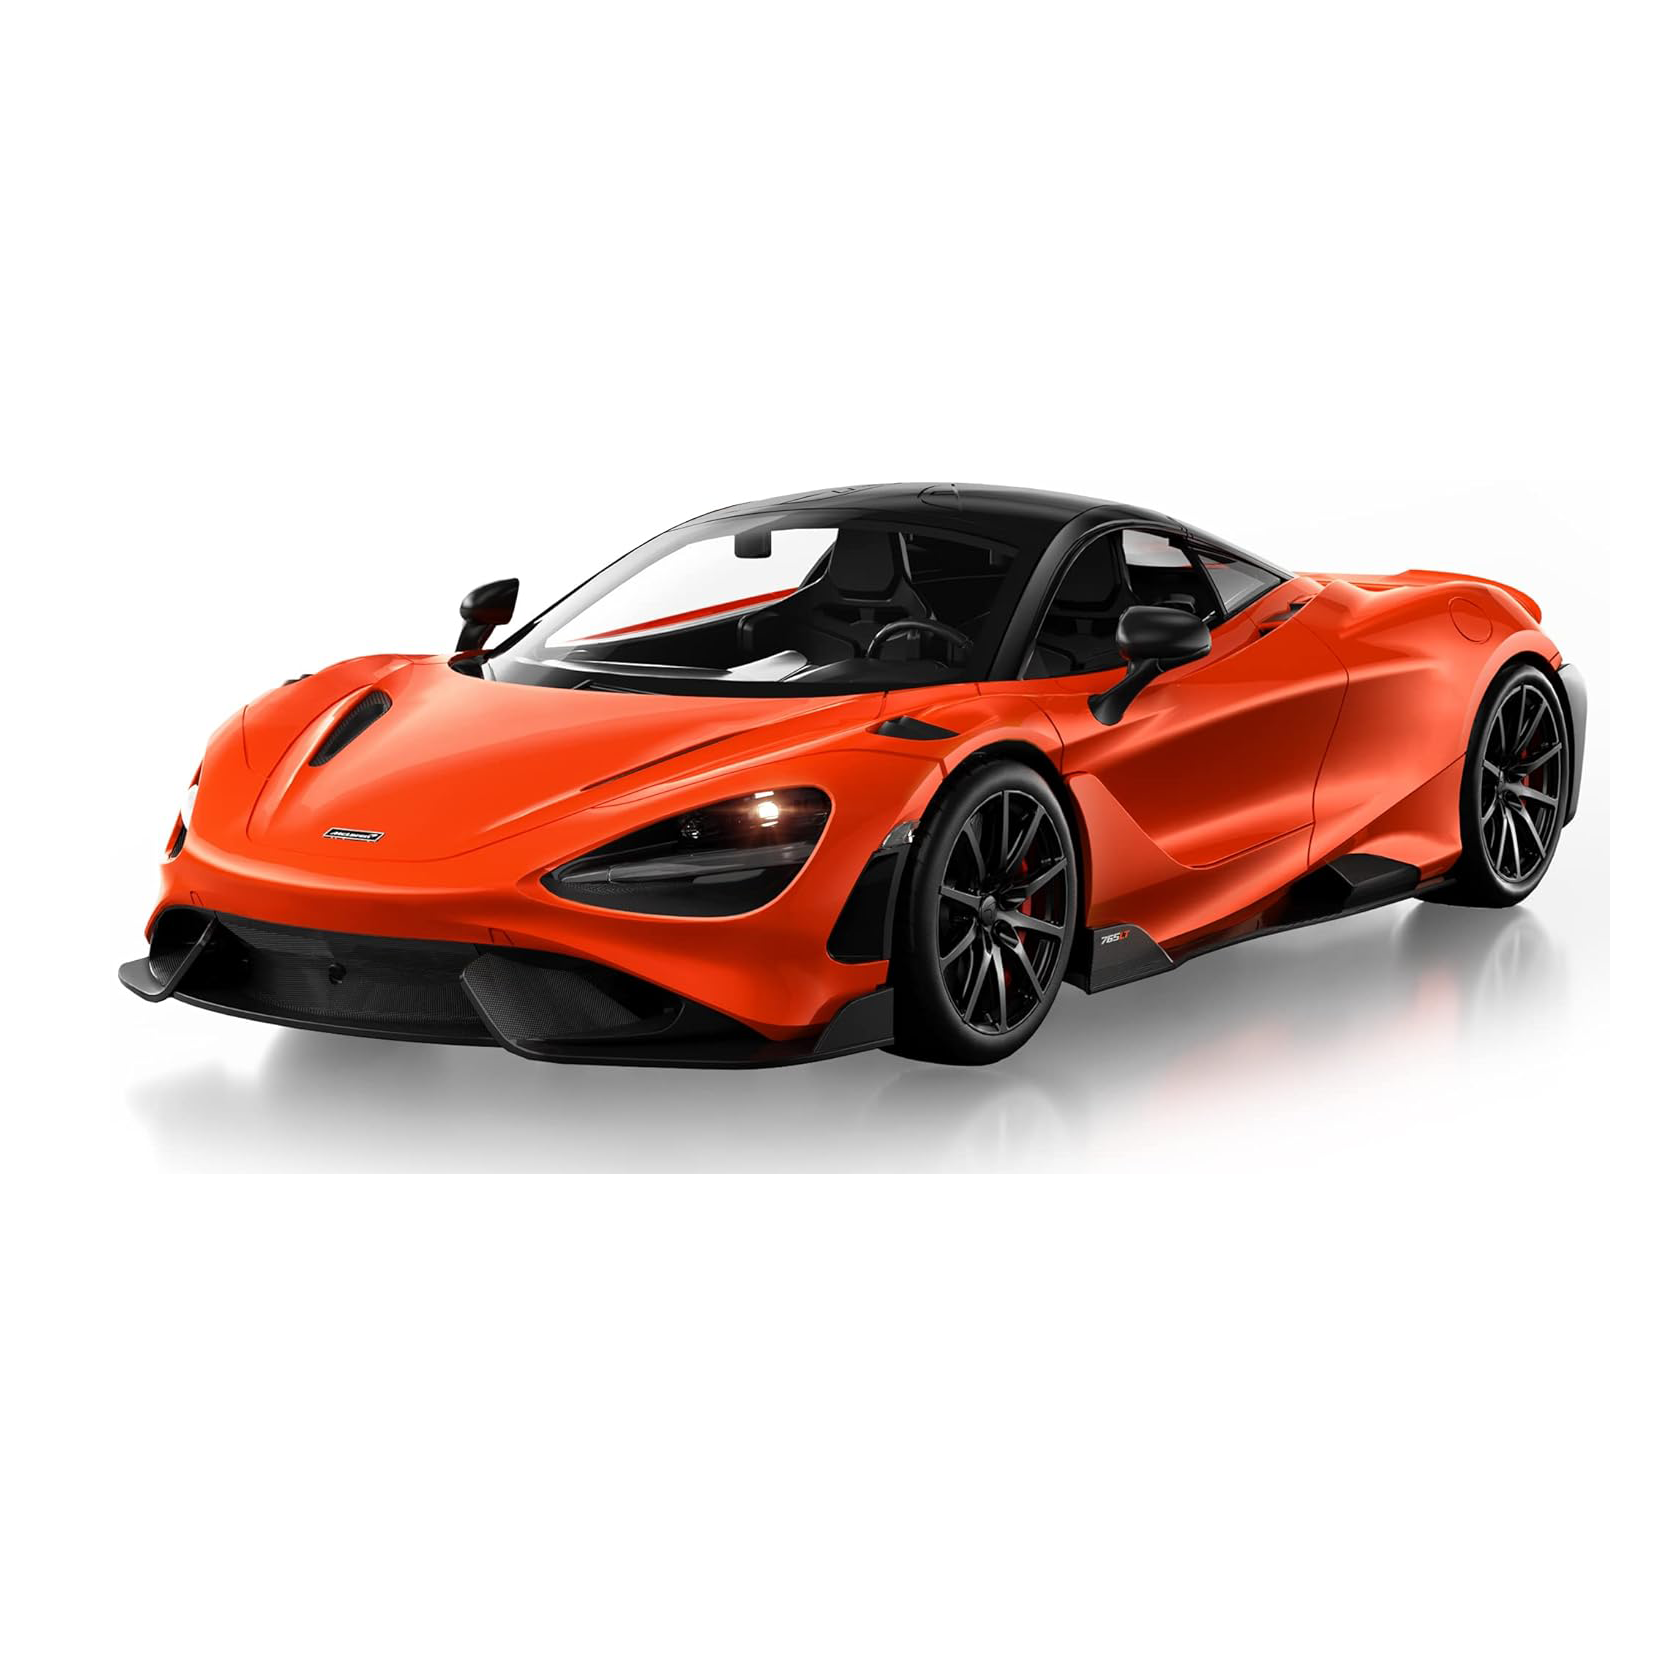 MIEBELY McLaren Rc Cars Remote Control Car